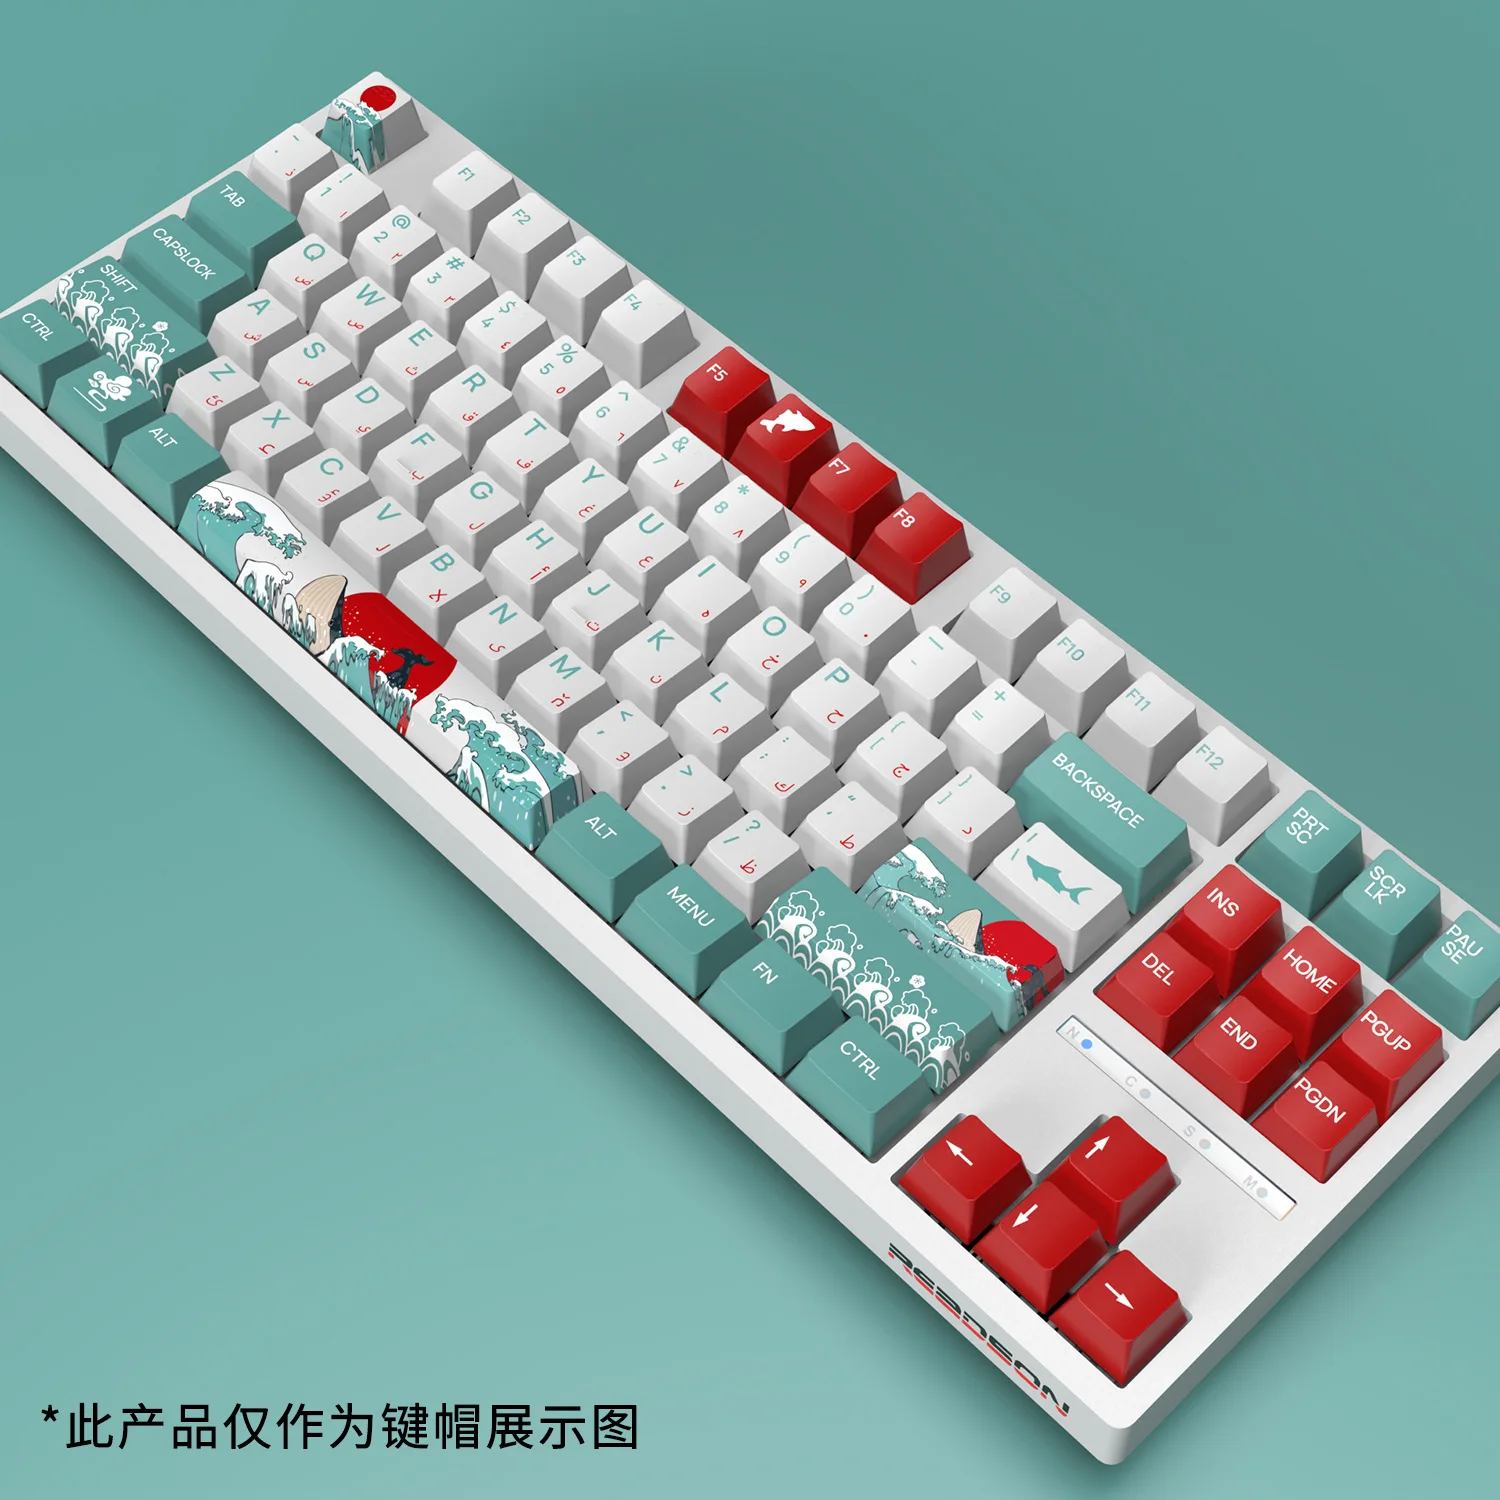 Arabic Keycaps Coral Sea Cute PBT OEM Sublimation For Mechanical Keyboard Personality Translucent Cyan White Keycap